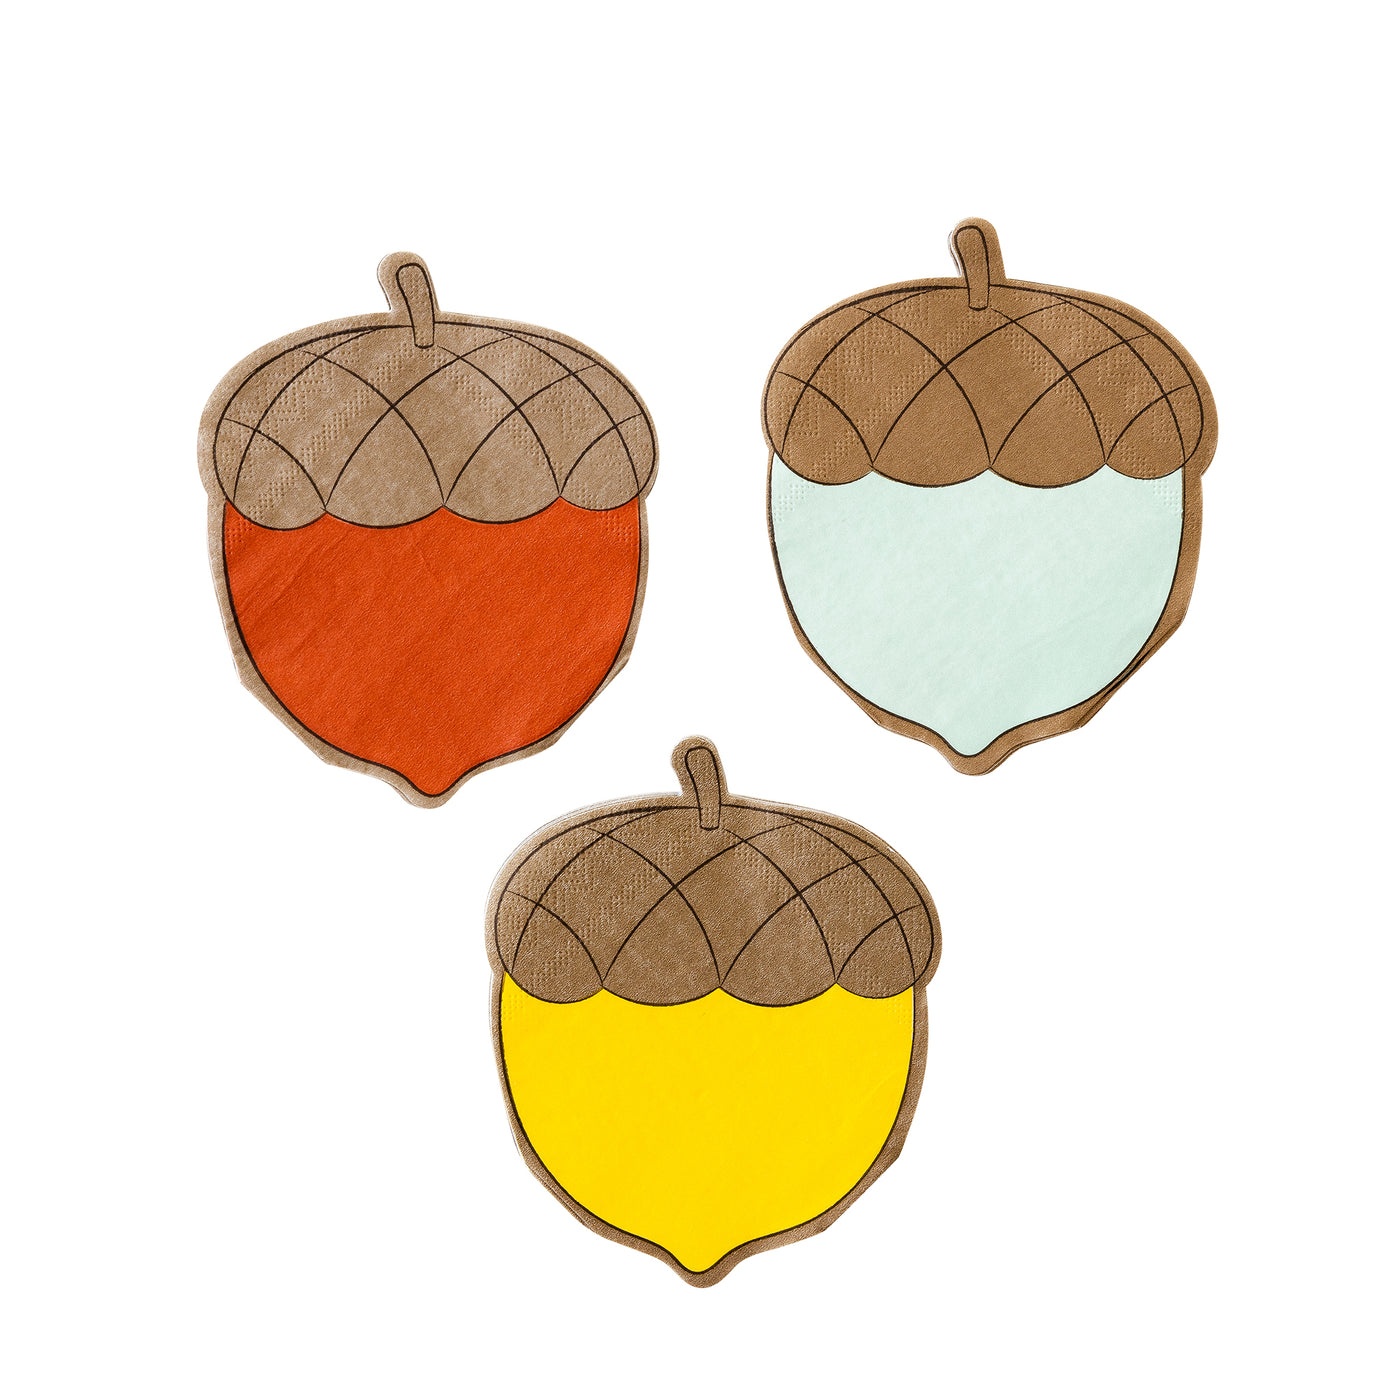 Occasions By Shakira - Harvest Acorn Shaped Cocktail Napkin Set